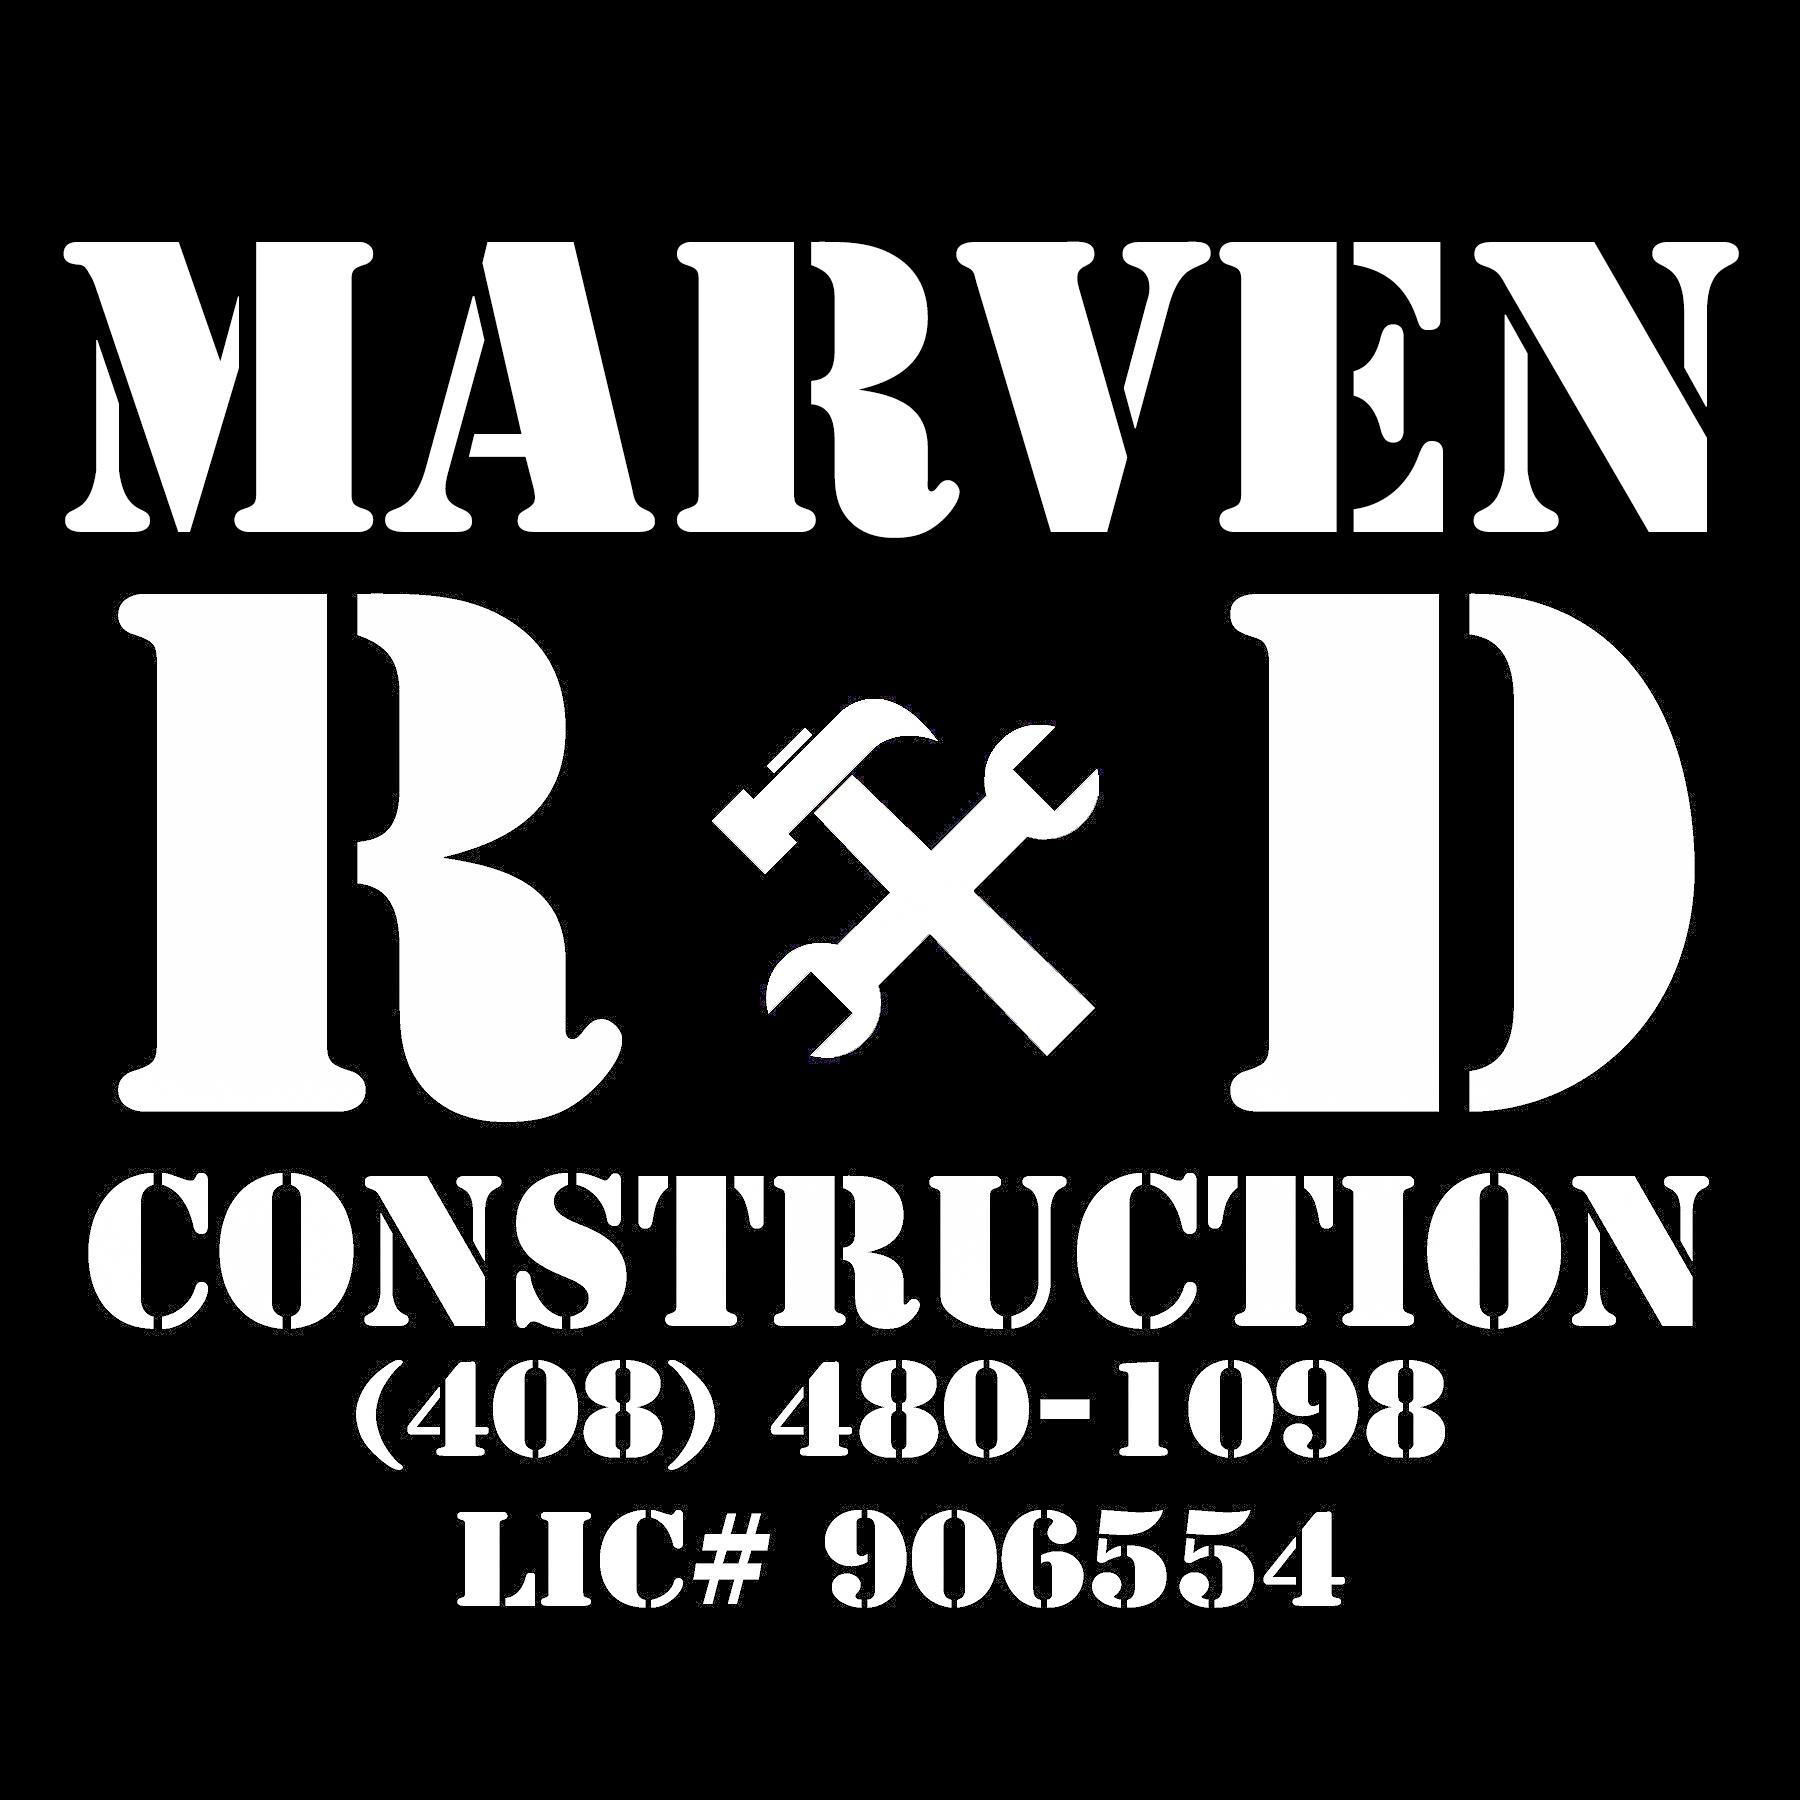 Licensed General Contractor in the SF Bay Area. Free walk-thru and estimates! Contact us at marvenrdconstruction@gmail.com